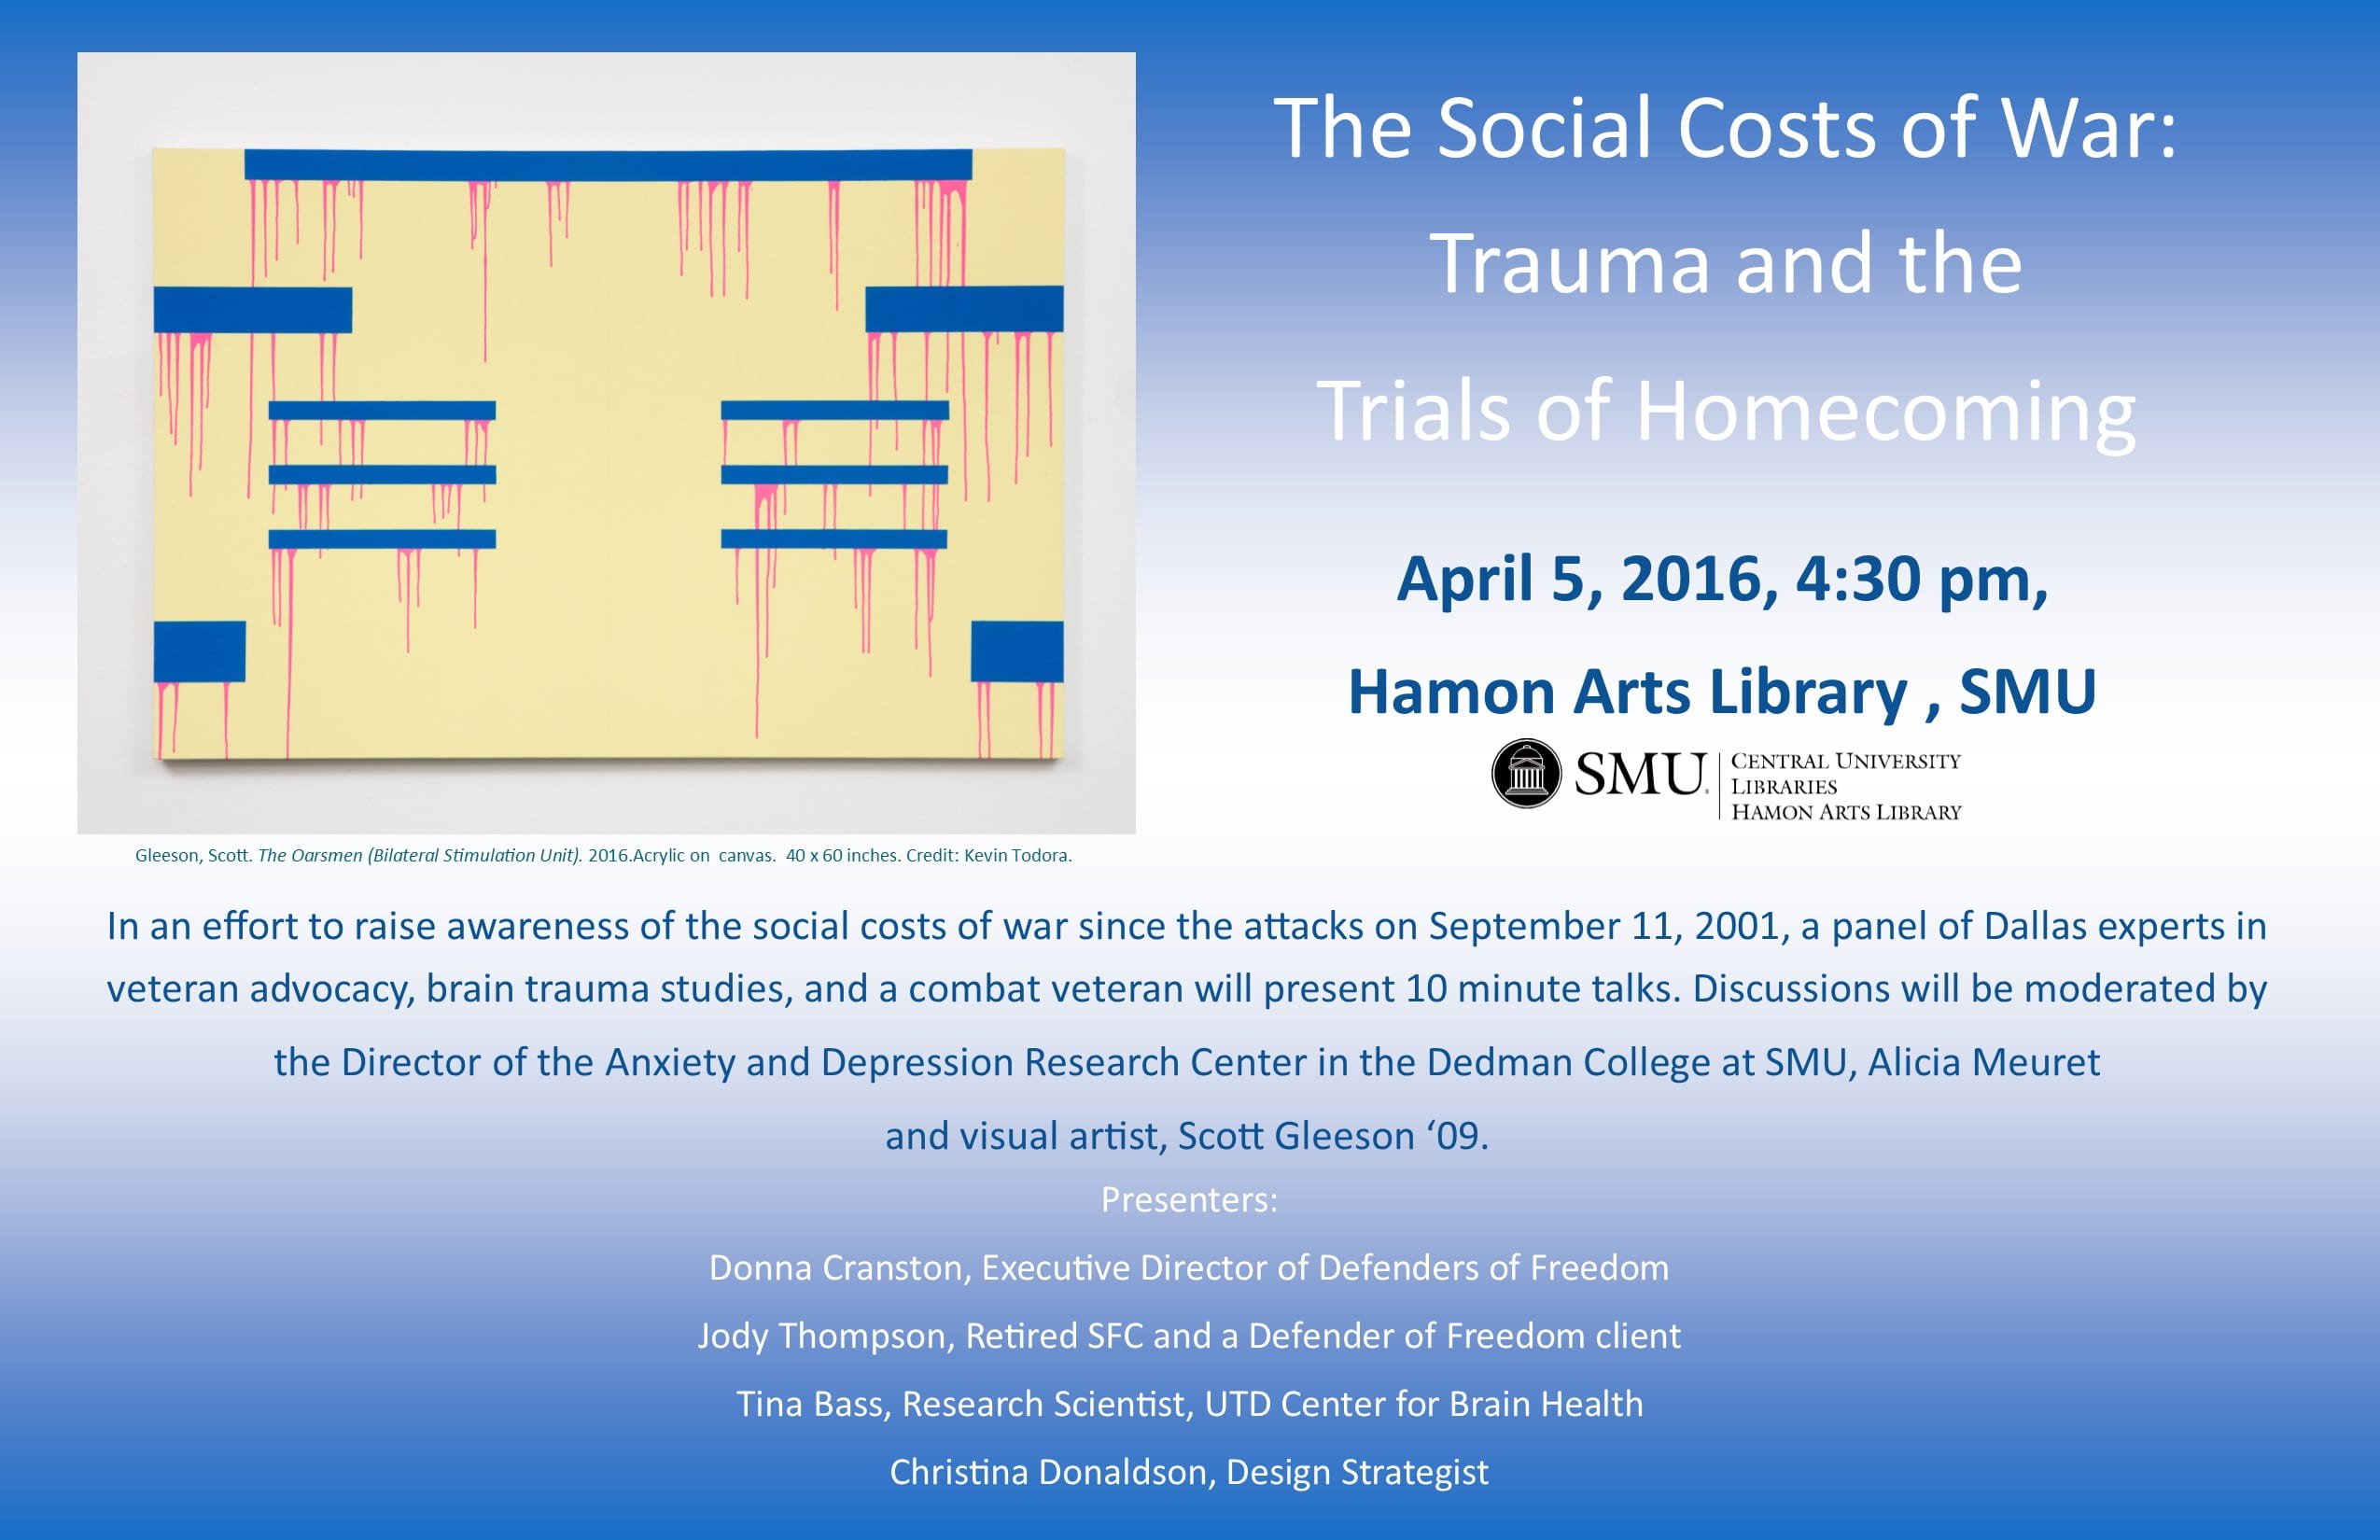 Panel Discussion – Social Costs of War: Trauma and the Trials of Homecoming